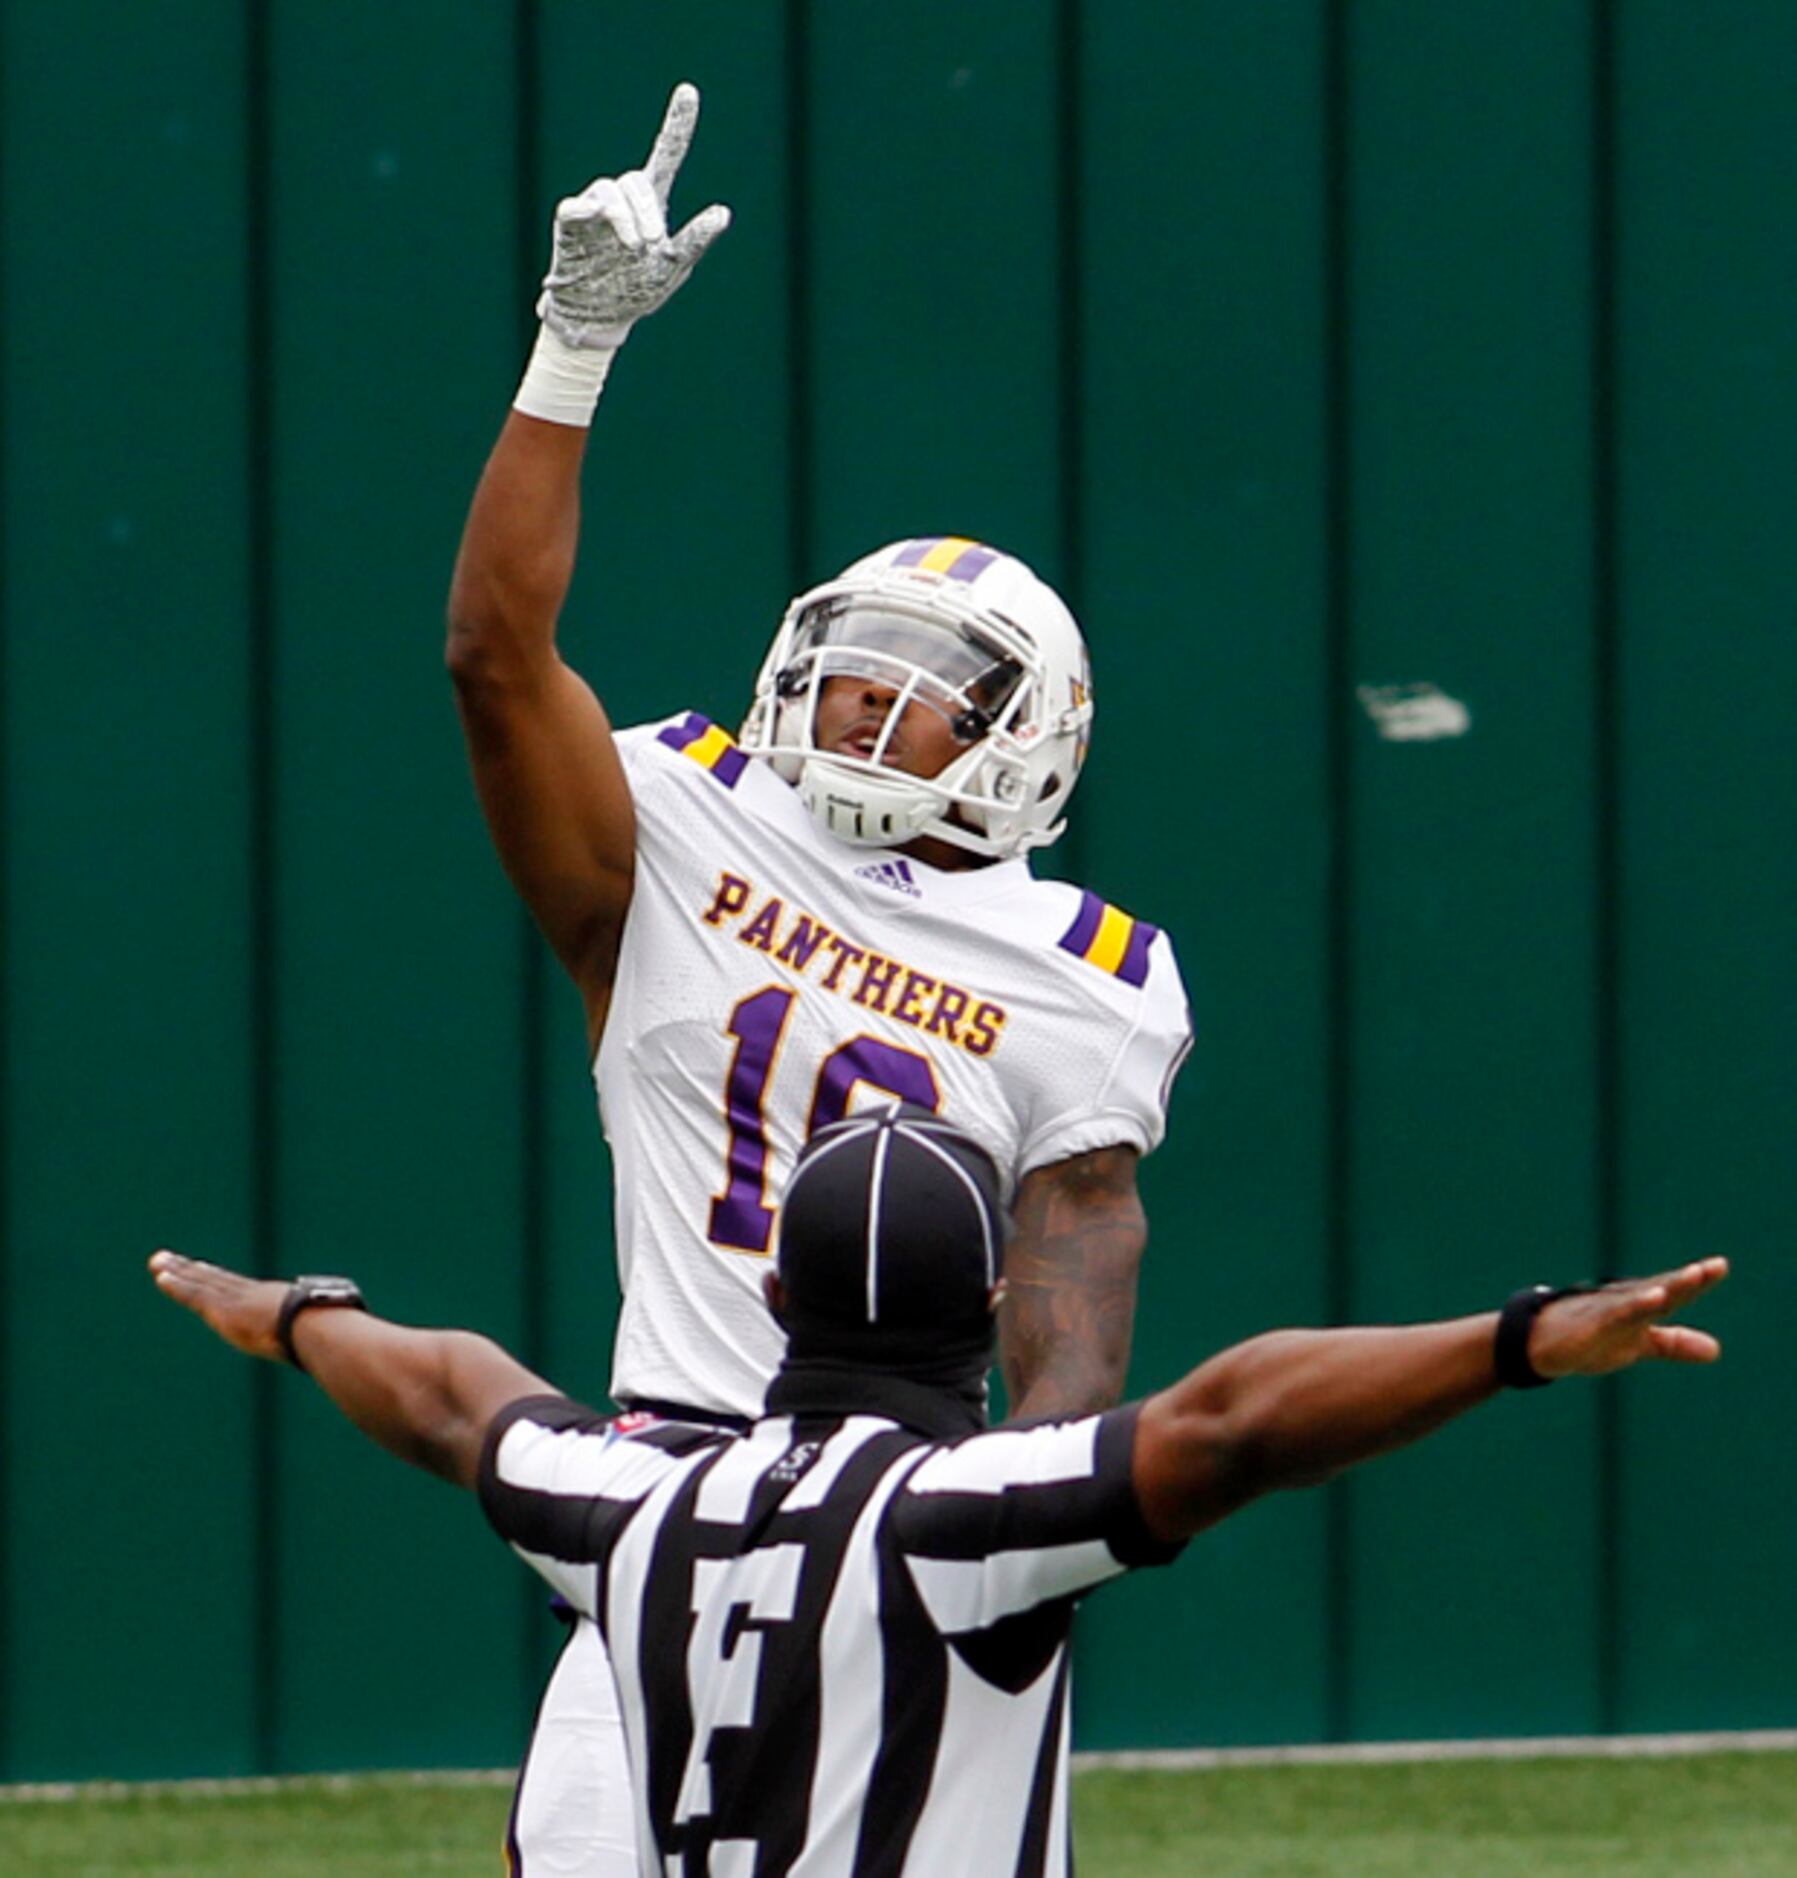 Prairie View A&M receiver Christopher Simmons (18) points upward as he celebrates a leaping...